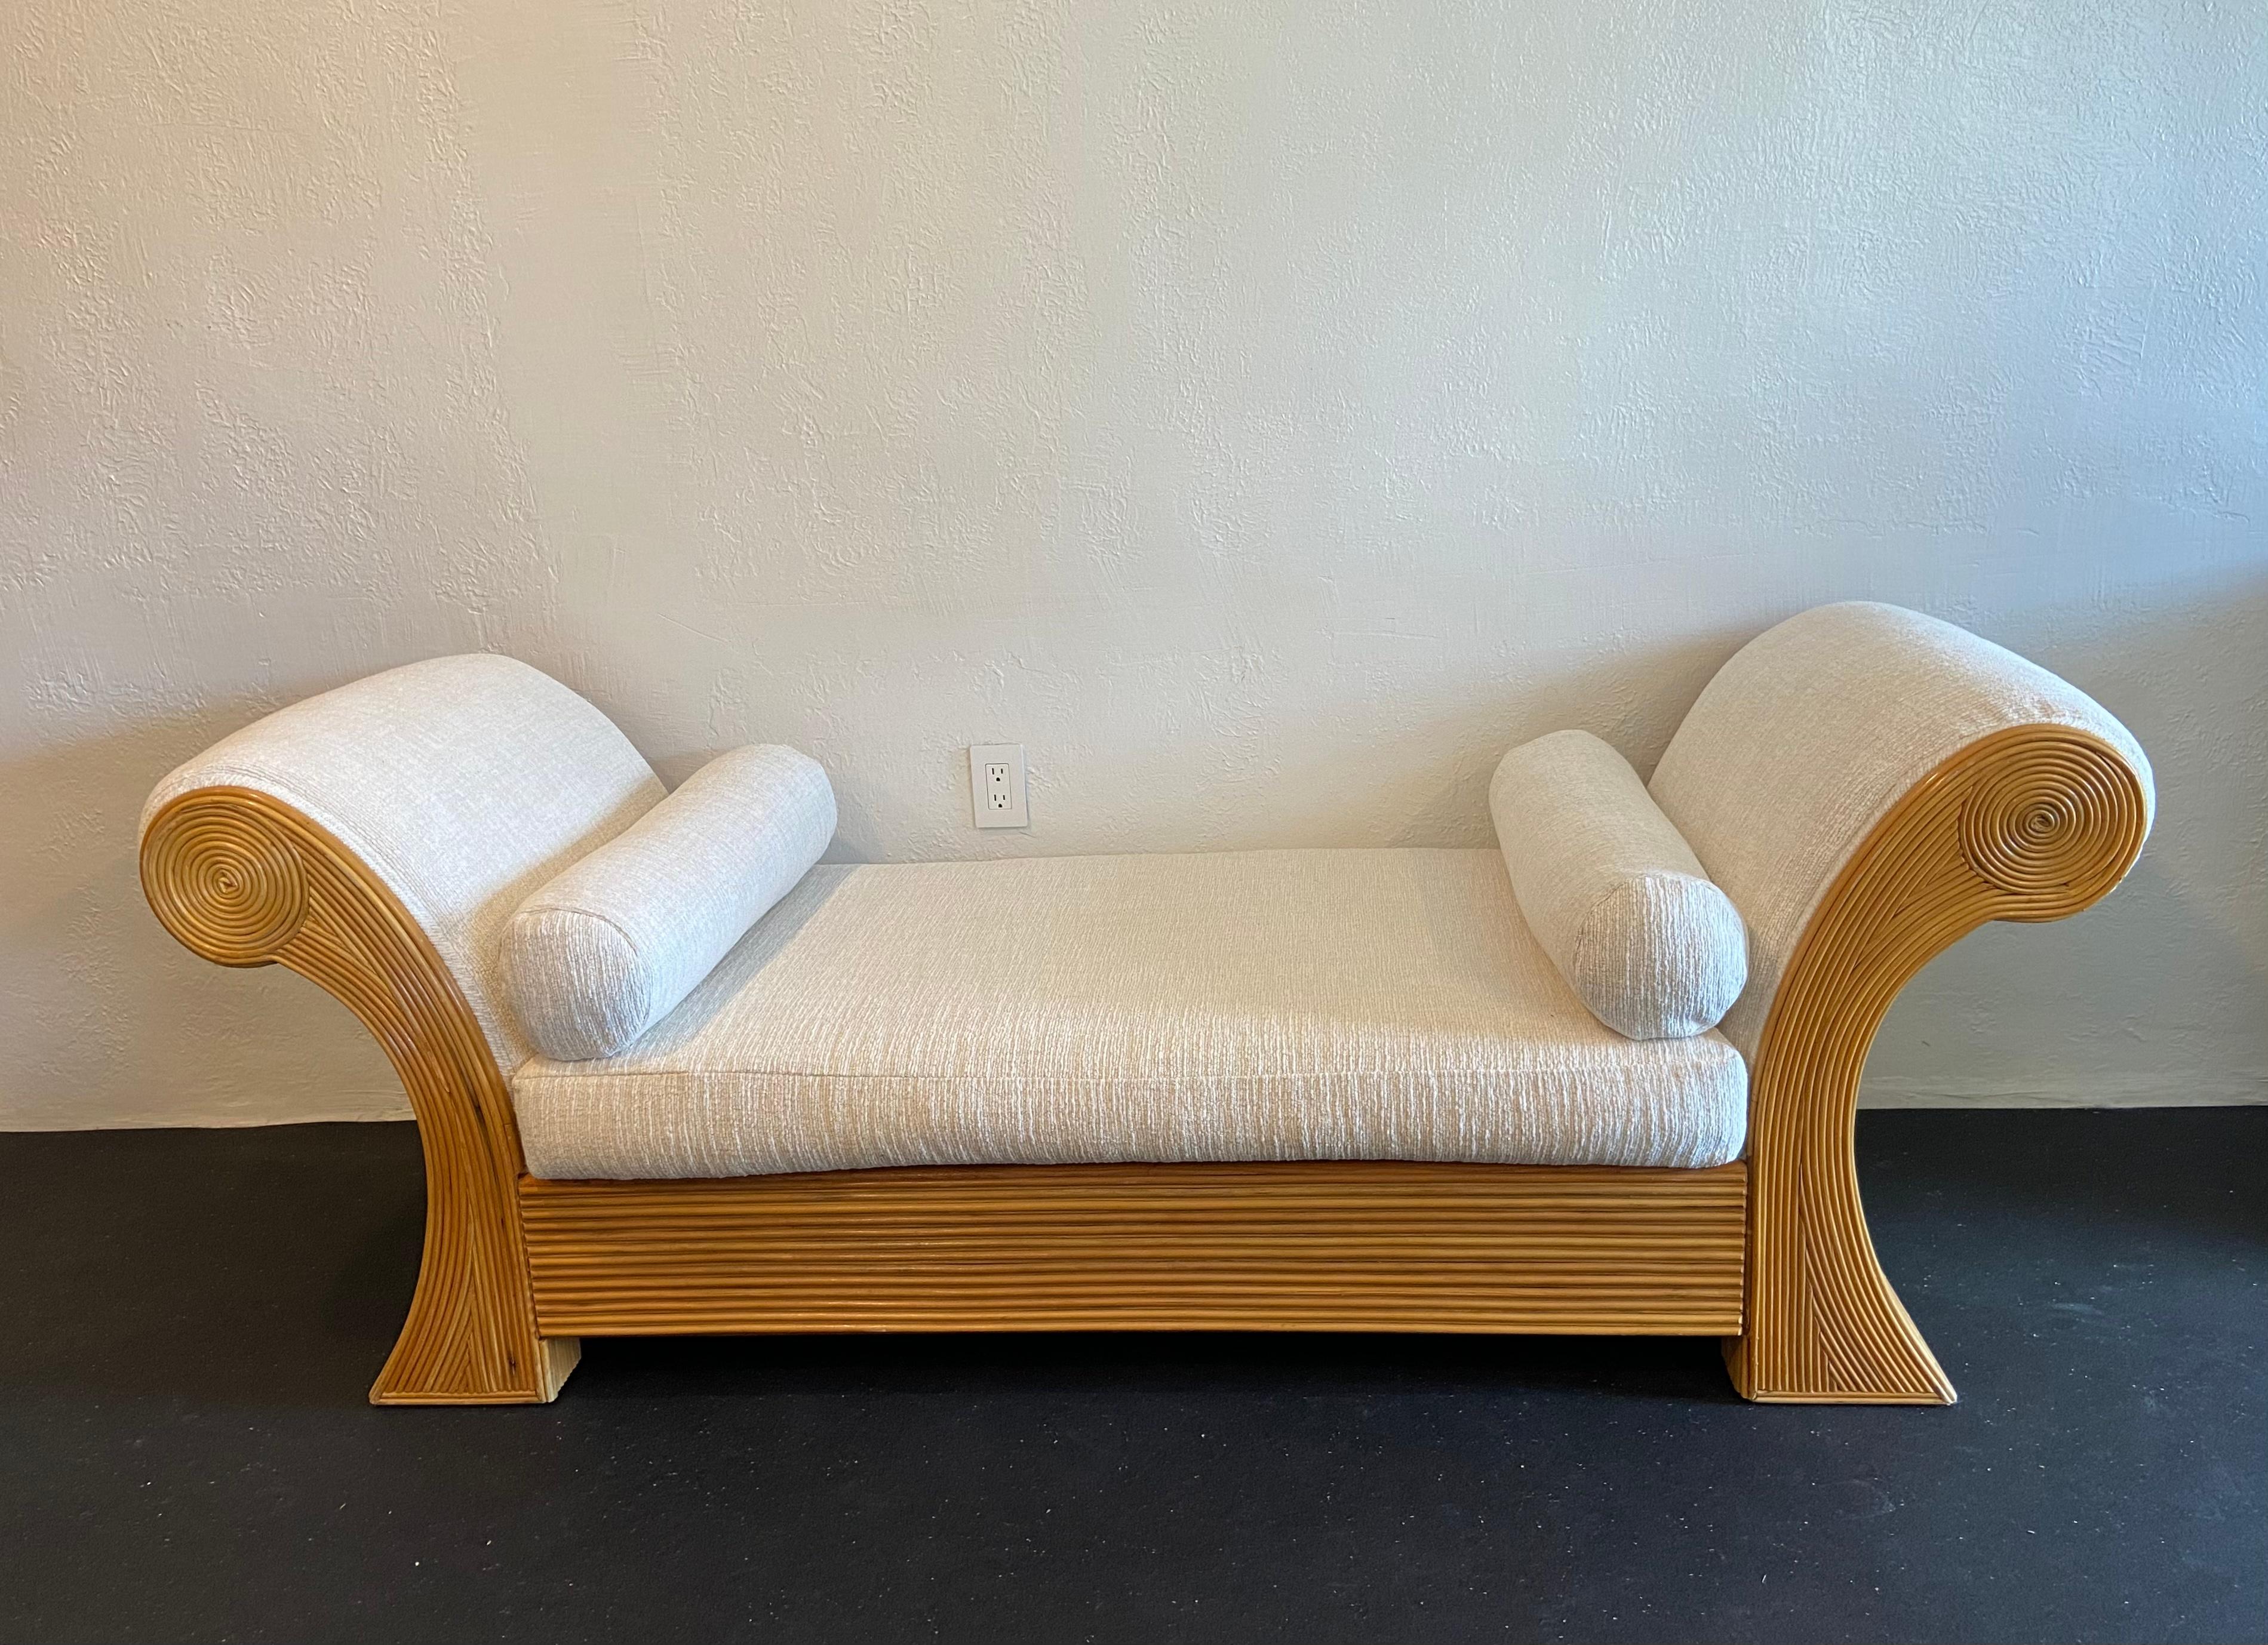 Rare Adrian Pearsall for Comfort Designs pencil reed daybed. The pencil reed is finished on both sides of the bed to allow for a floating application. Newly upholstered in a nubby chenille/cotton blend. 

Would work well in a variety of interiors